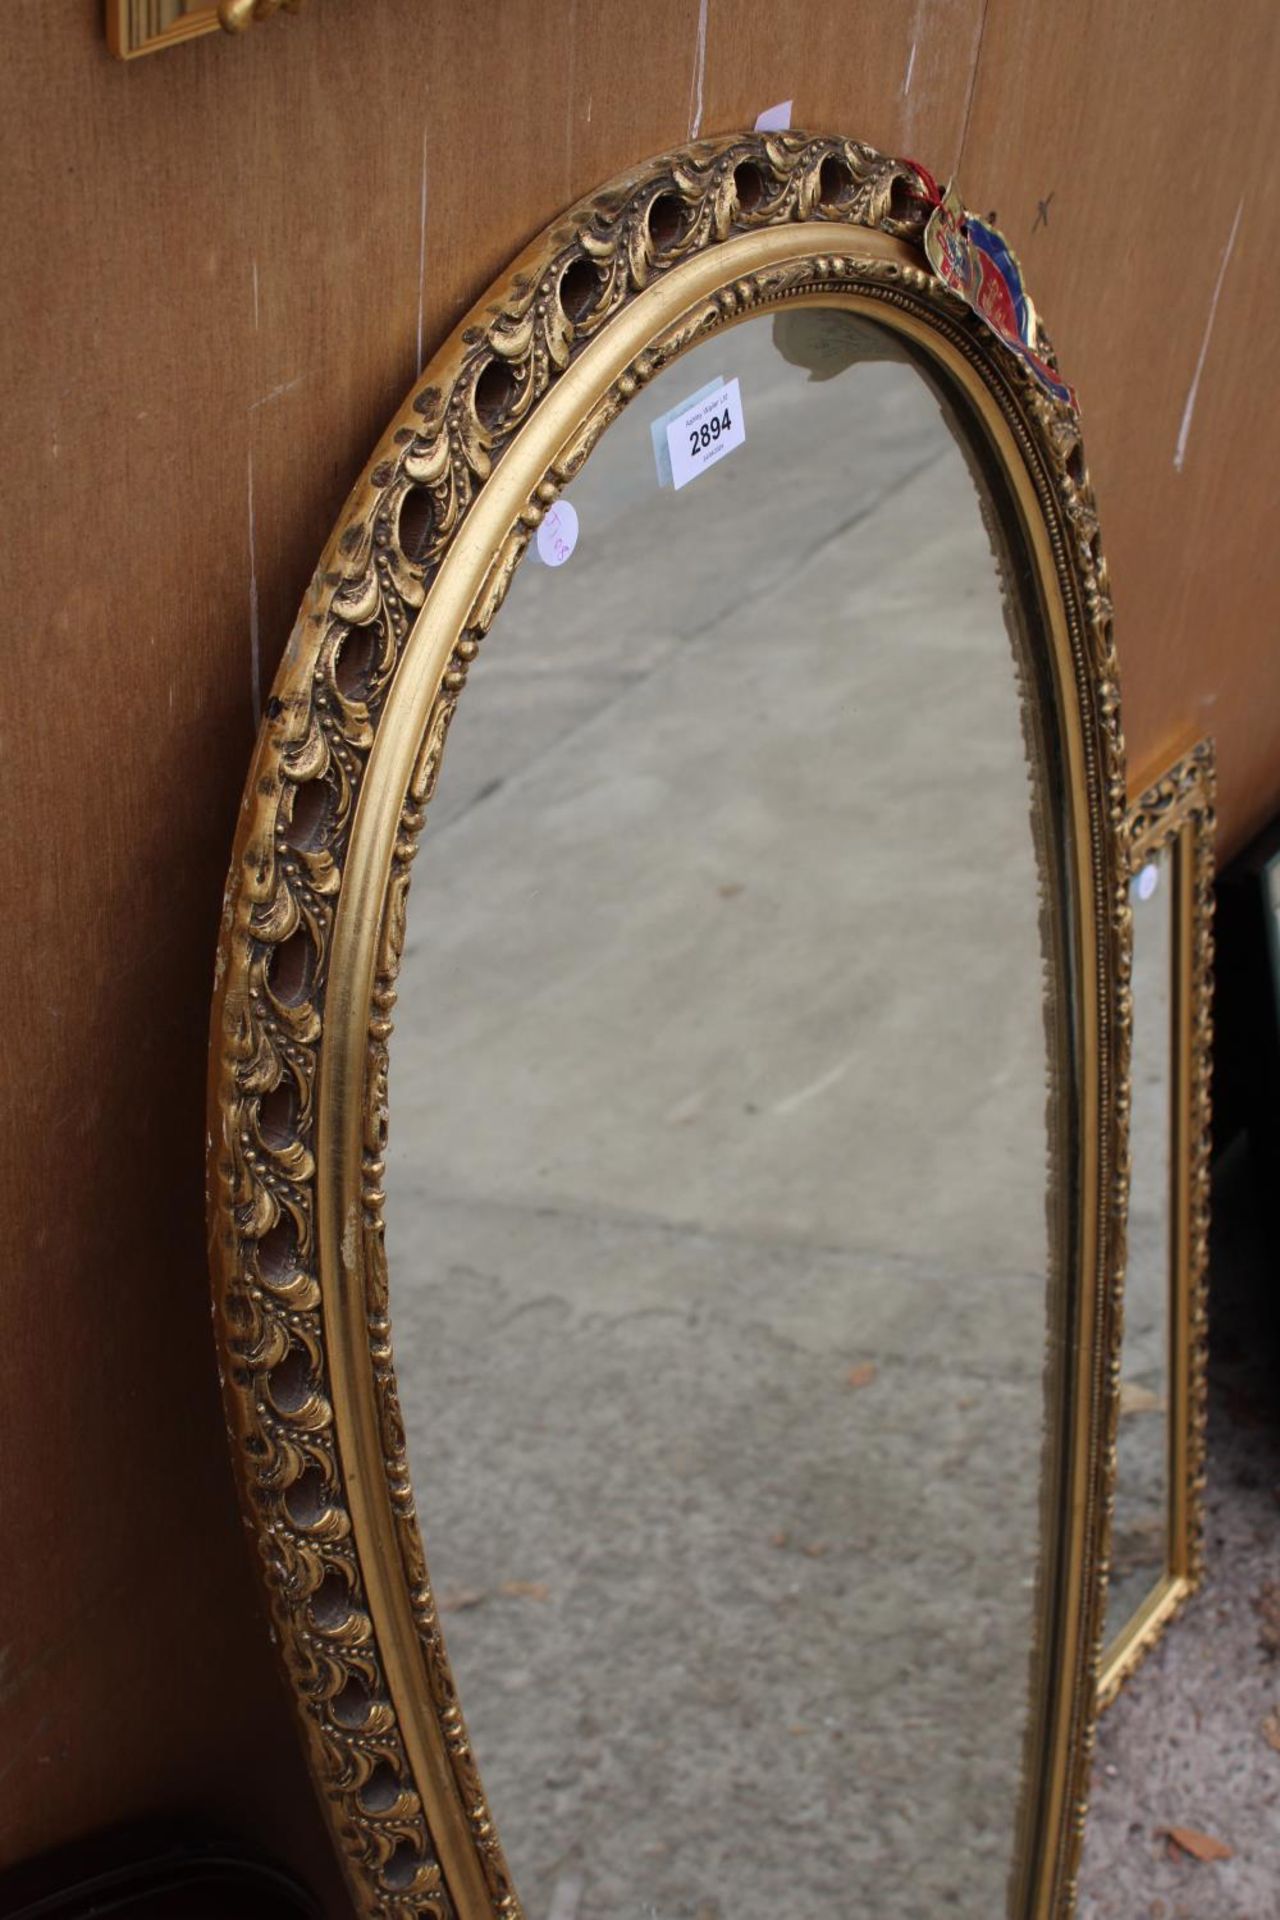 A MODERN GILT FRAMED PERRY OVERMAN (GLOVE) WALL MIRROR, 48" X 21" - Image 2 of 2